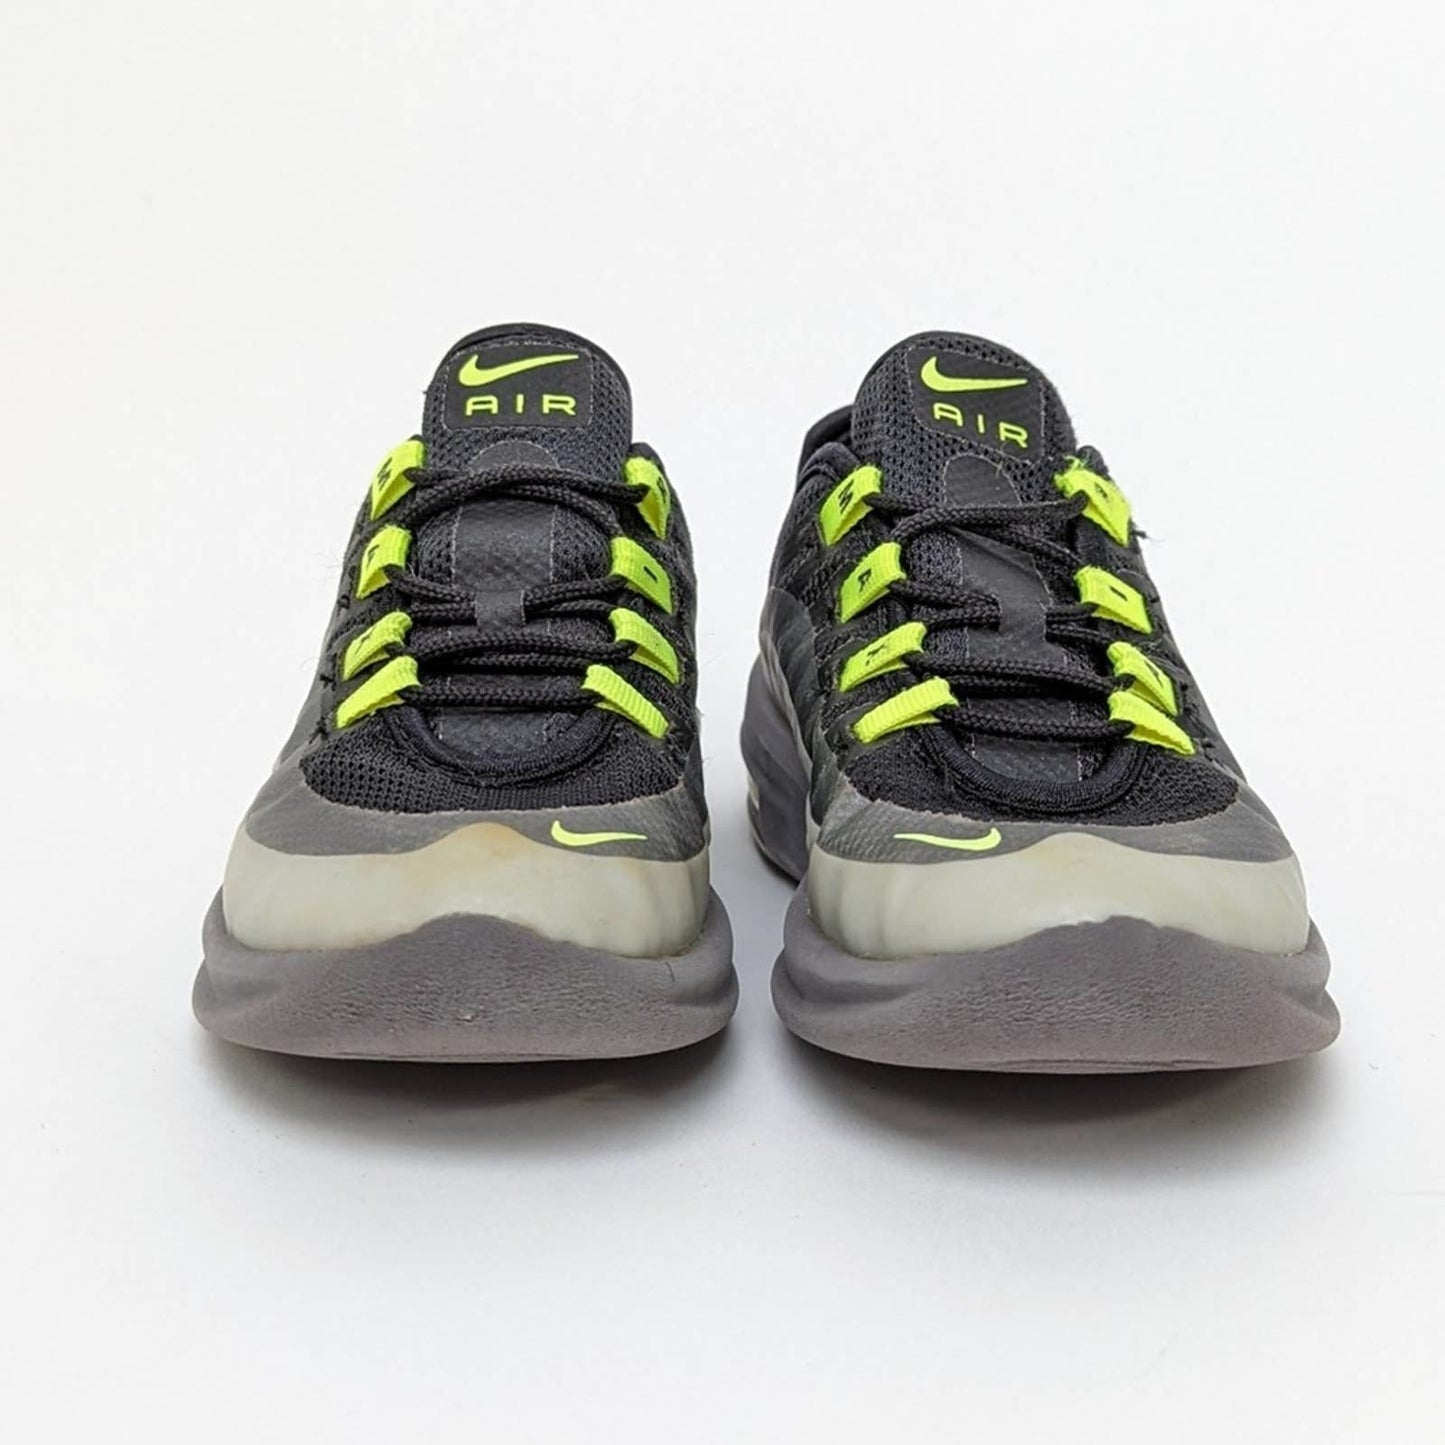 Nike Kids Air Max Axis (ps) Sneaker Shoes - 13C